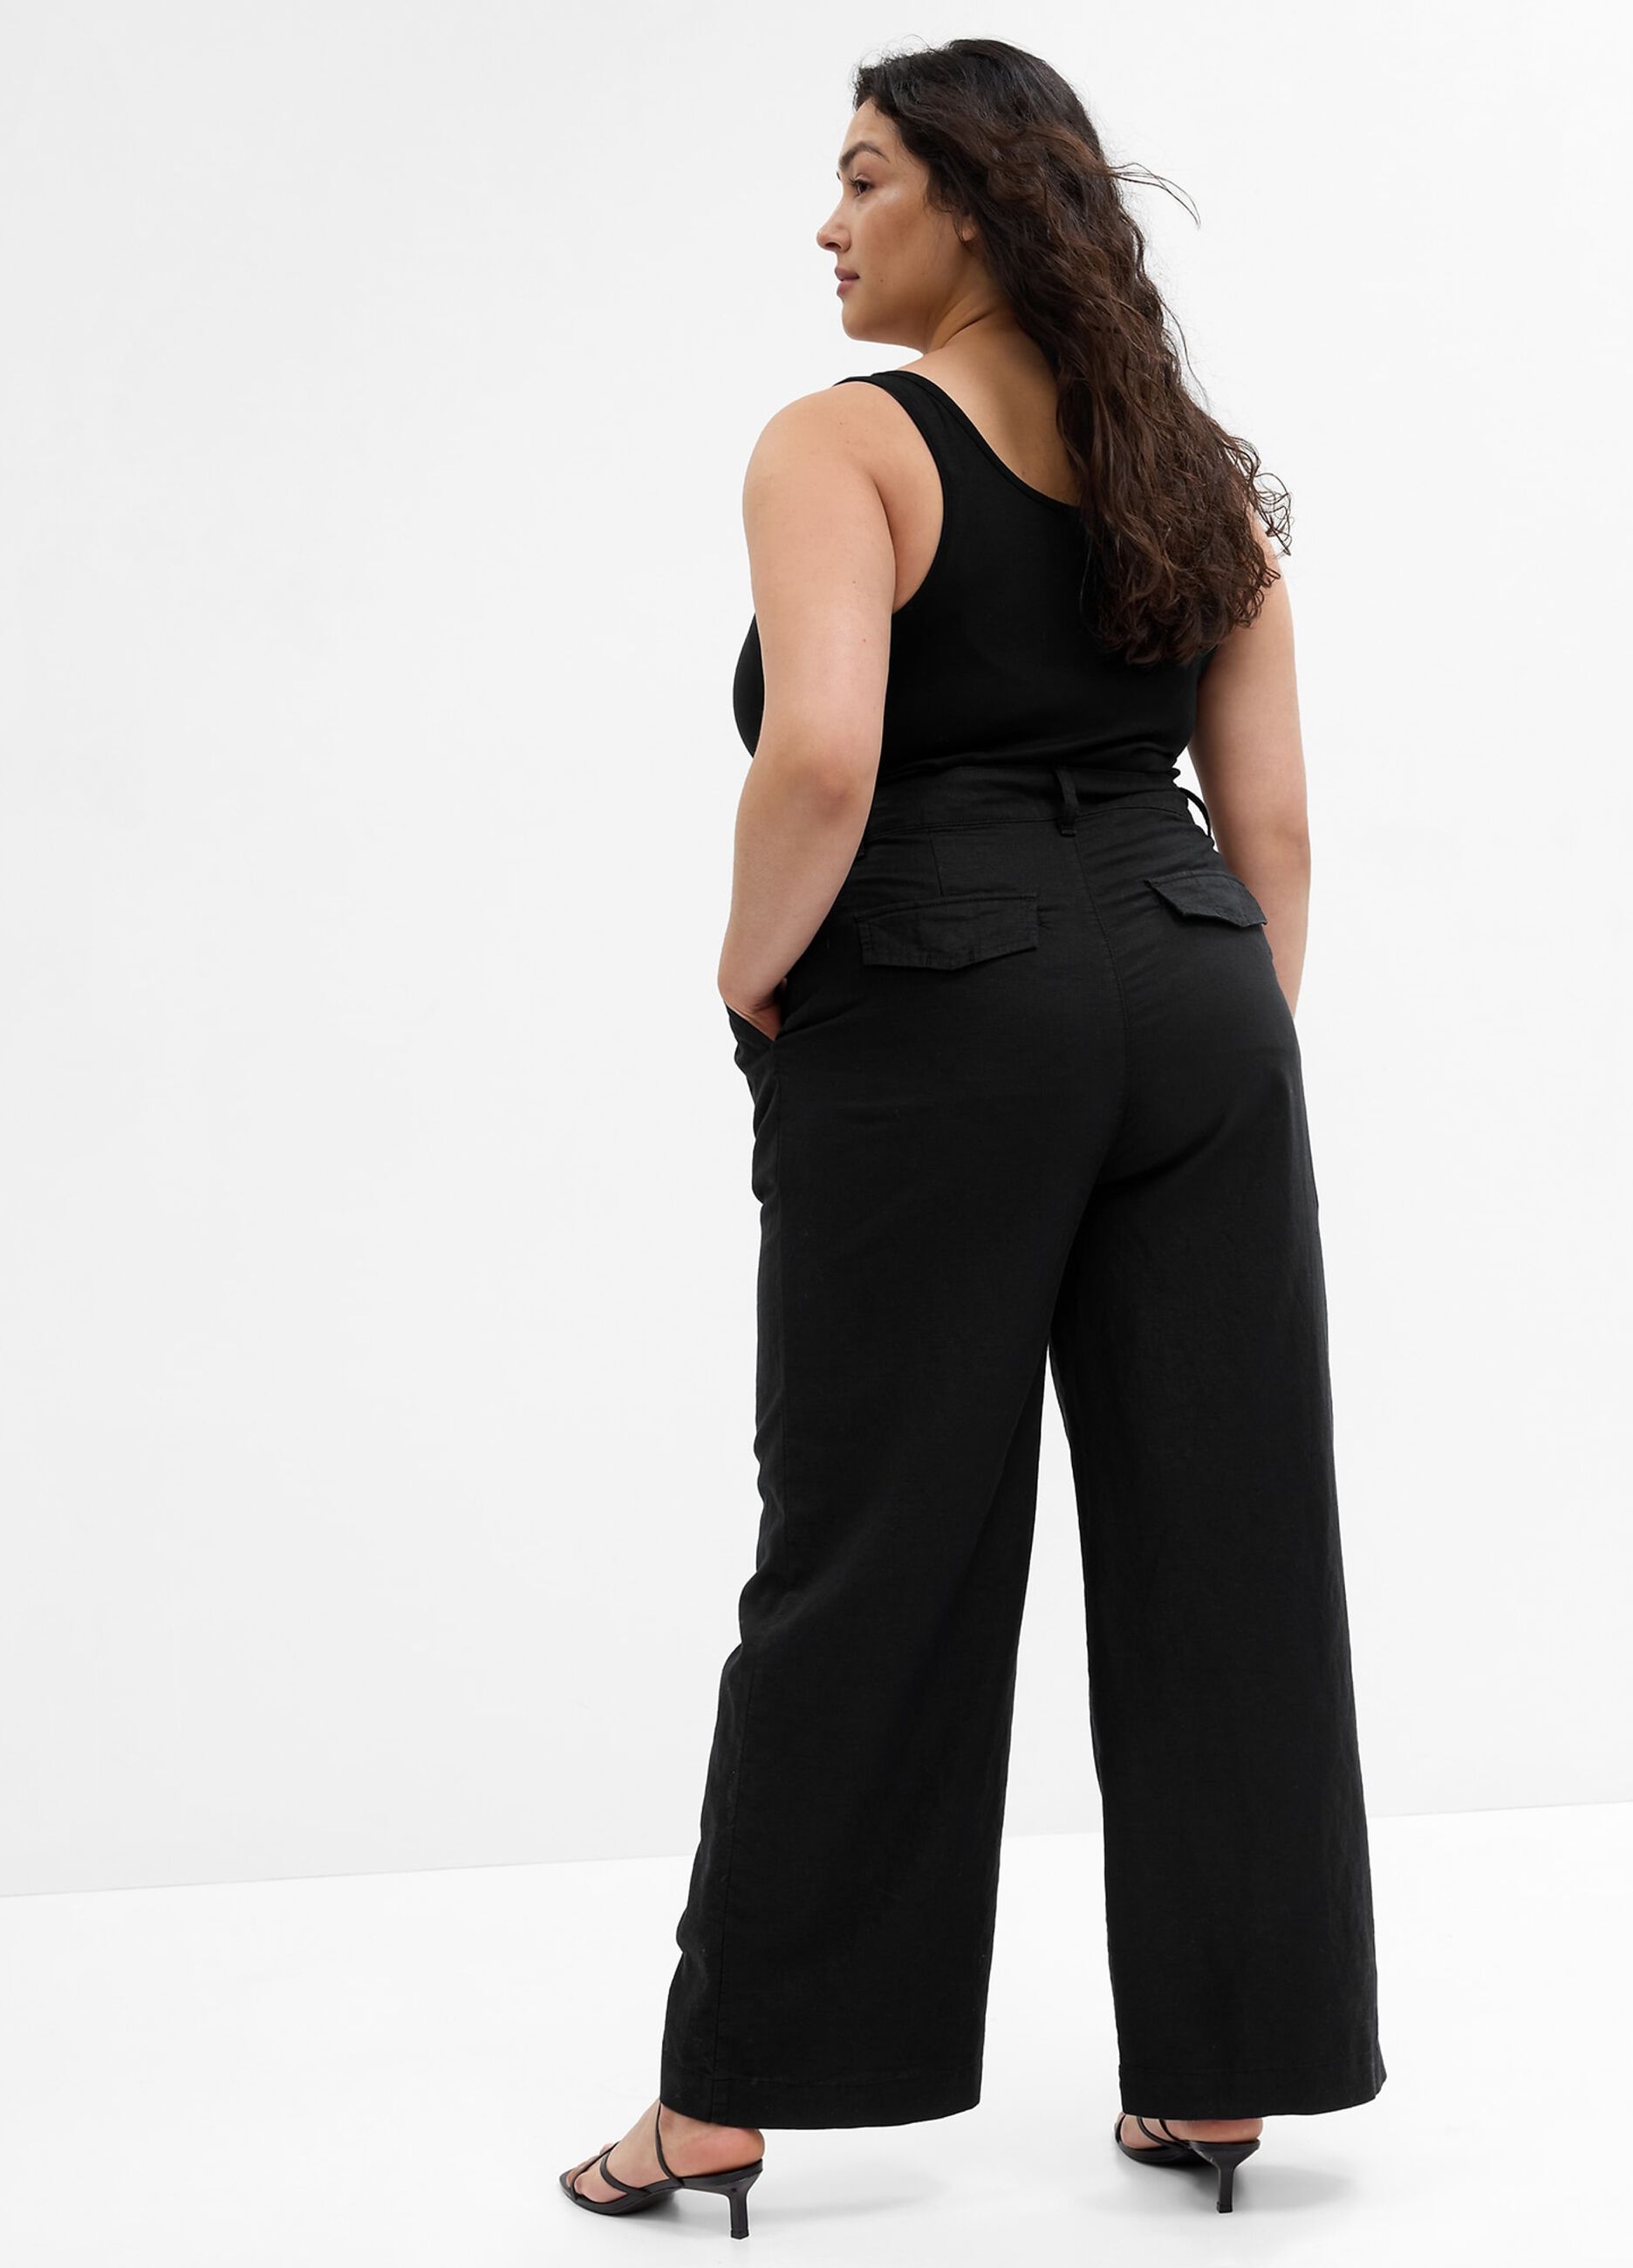 Wide-leg trousers with darts